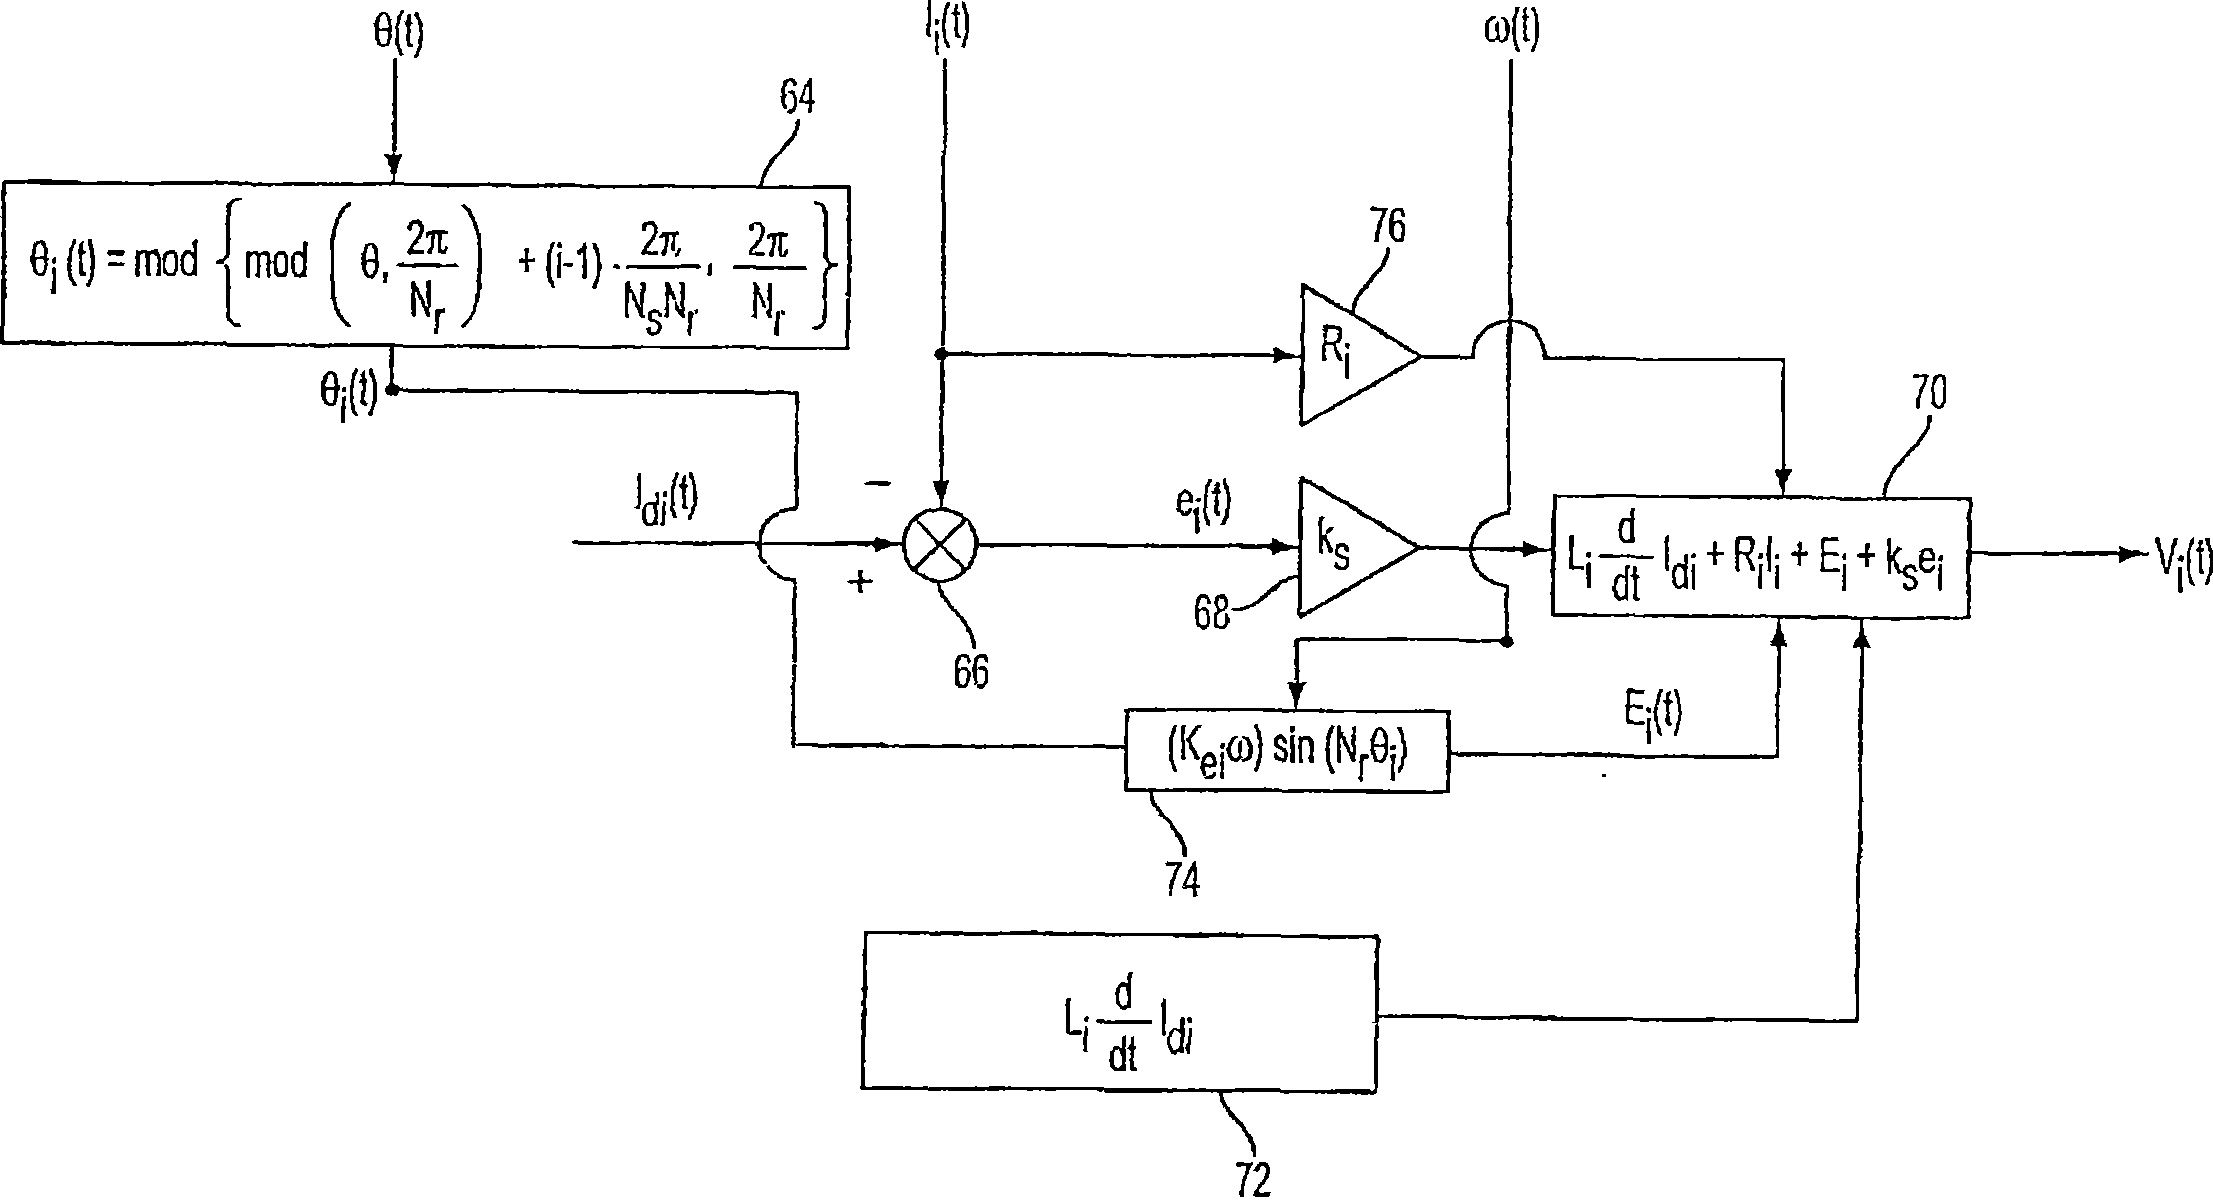 Electric vehicle with adaptive cruise control system